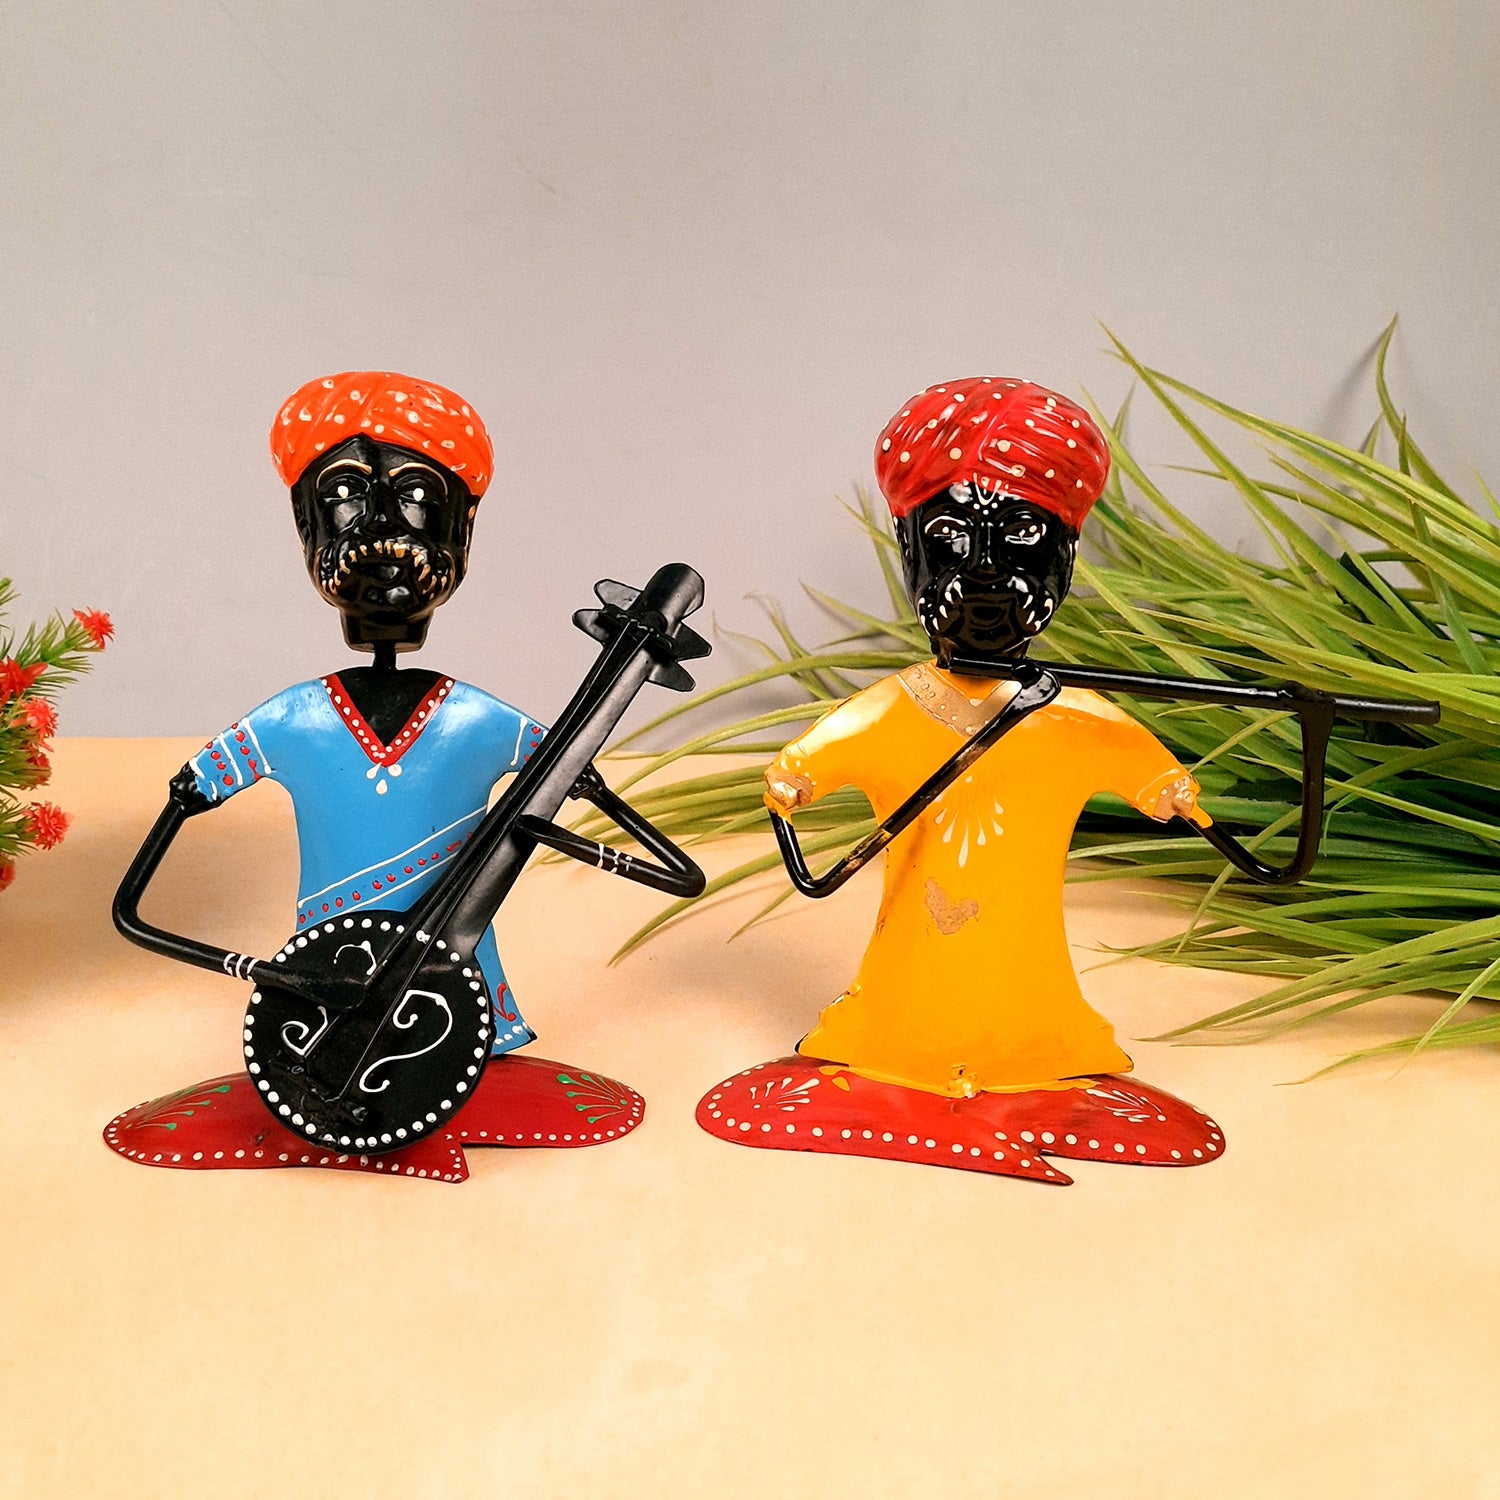 Rajasthani Musicians Figurines | Decorative Showpiece - for Home, Bedroom, Living Room, Office Desk & Table | Gifts For Wedding, Housewarming & Festivals - 7 Inch - Apkamart #Style_Pack of 2